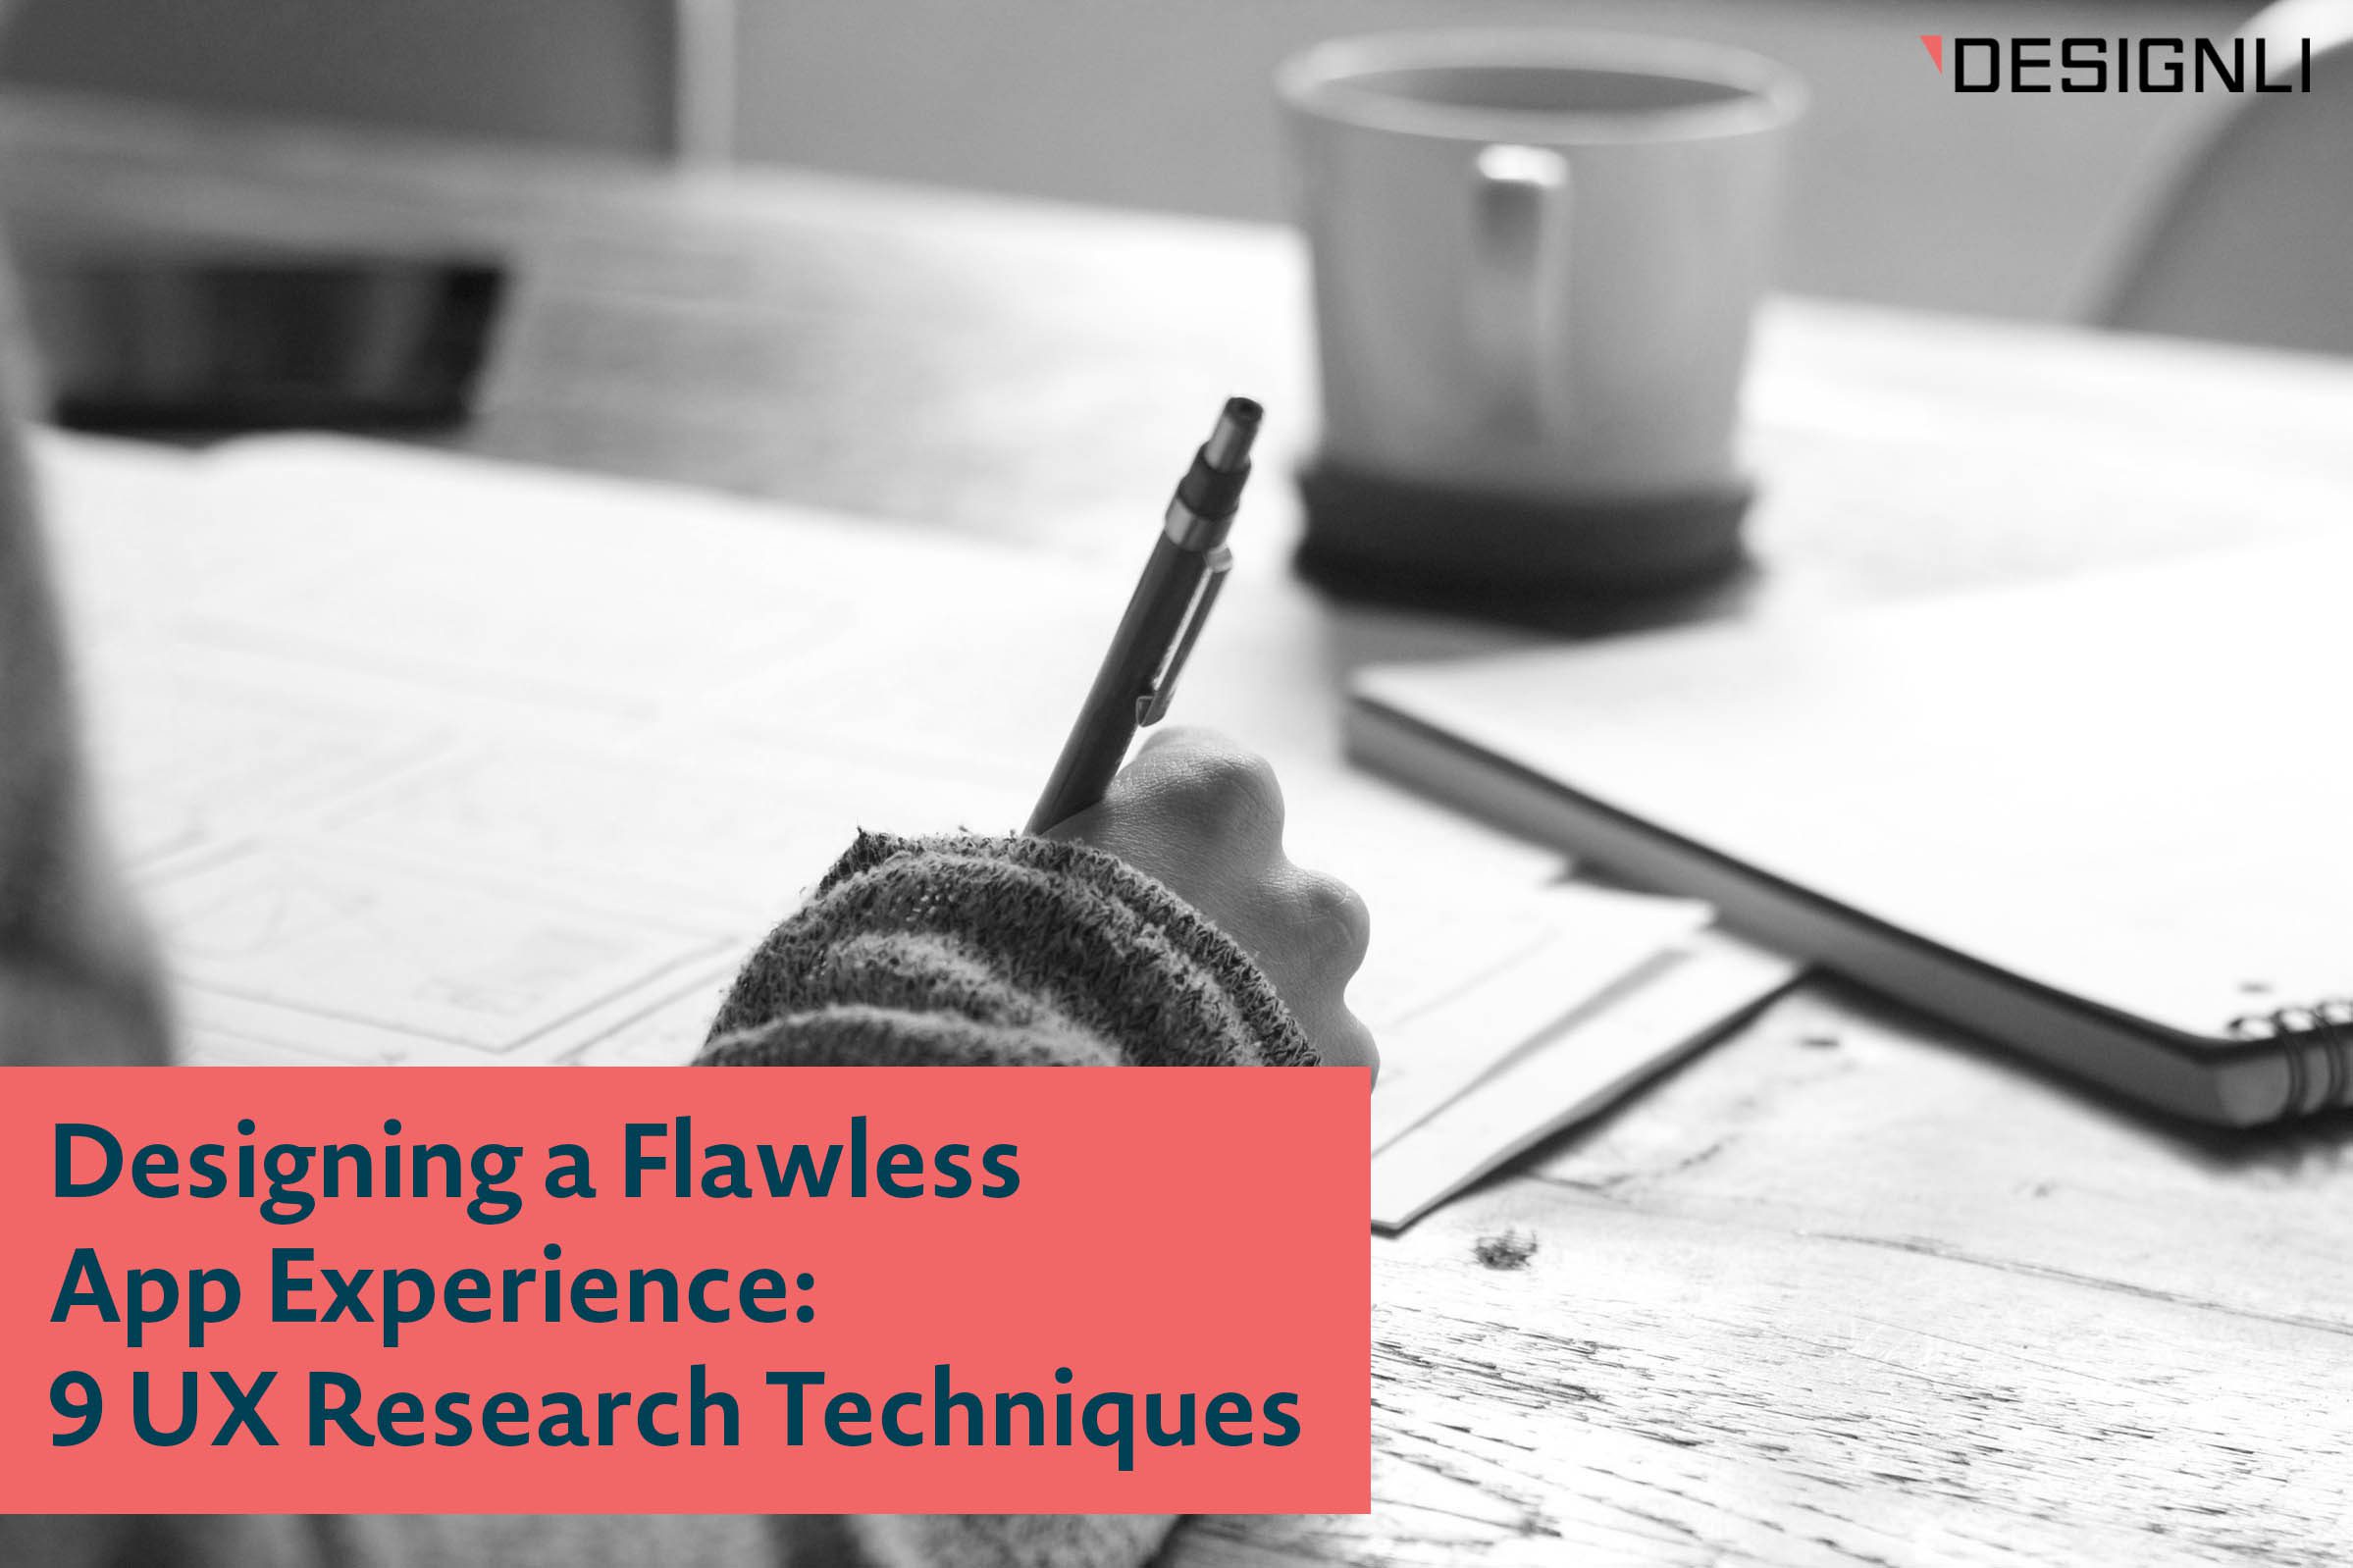 Designing a Flawless App Experience: 9 UX Research Techniques